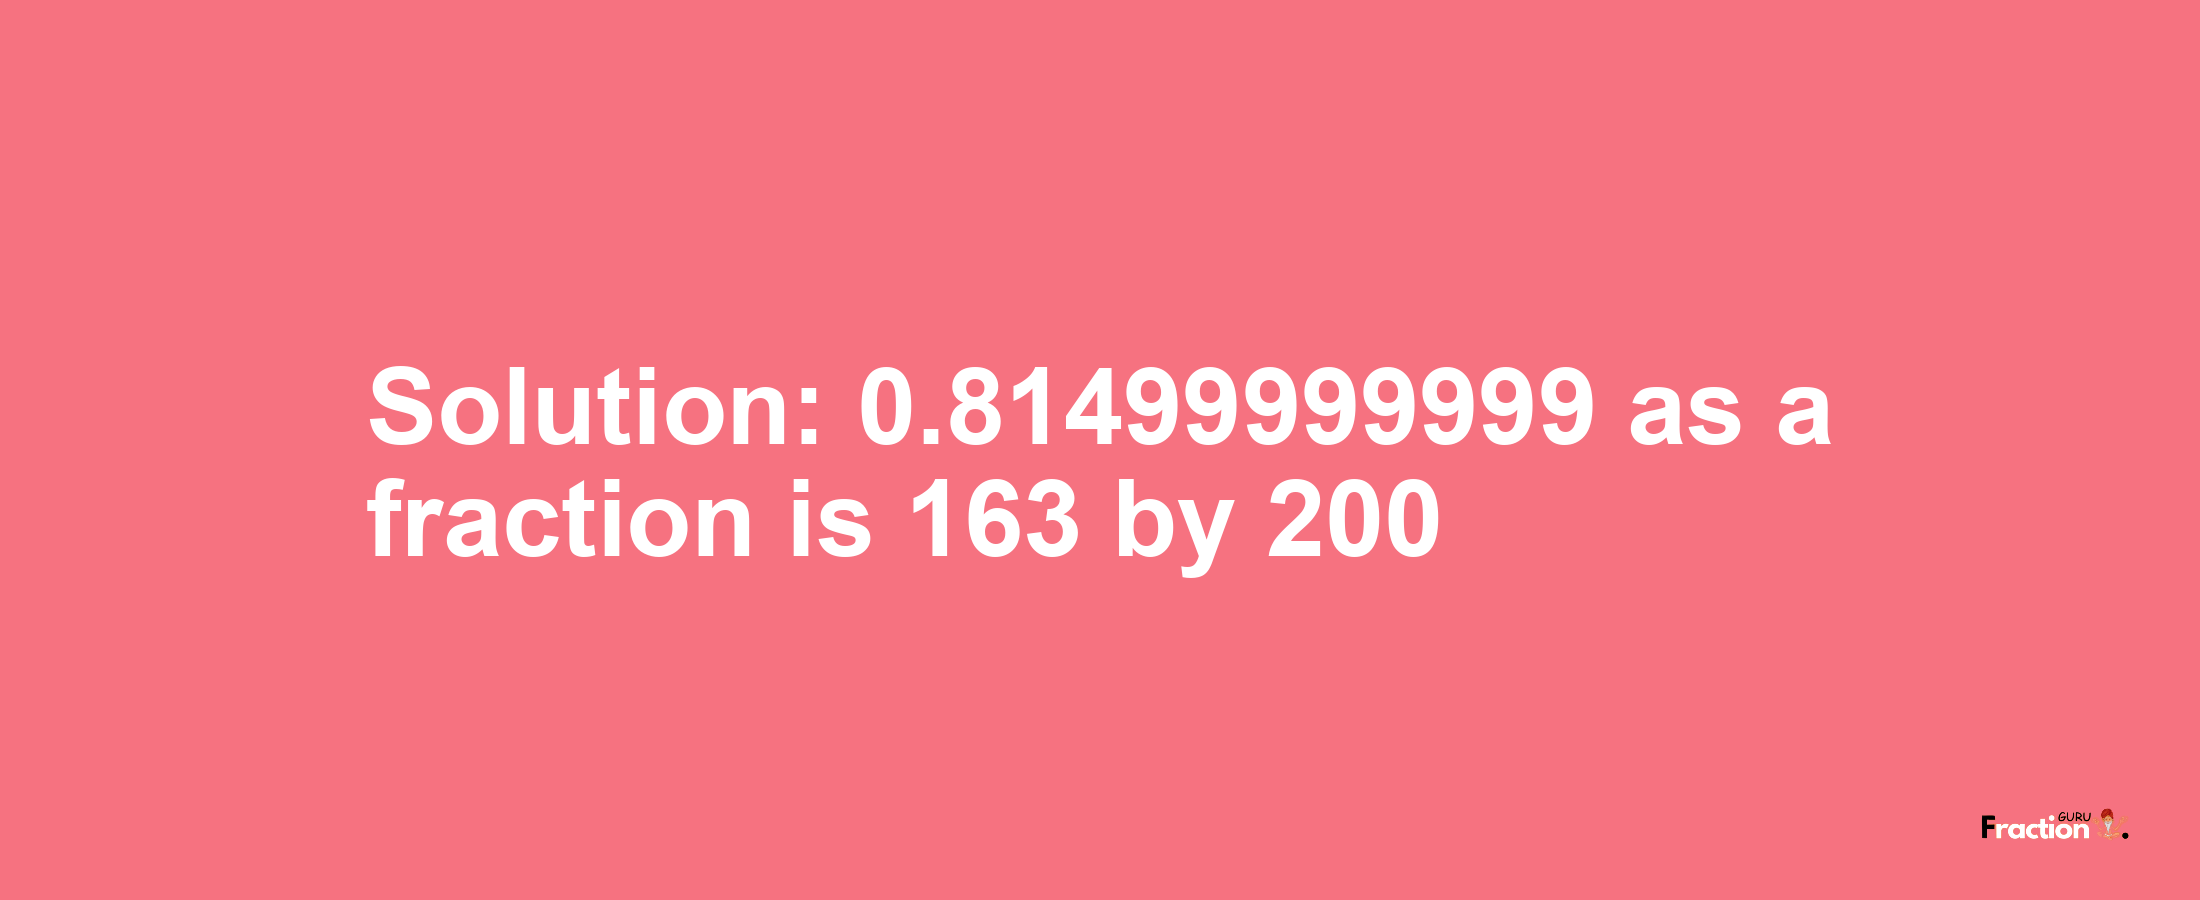 Solution:0.81499999999 as a fraction is 163/200